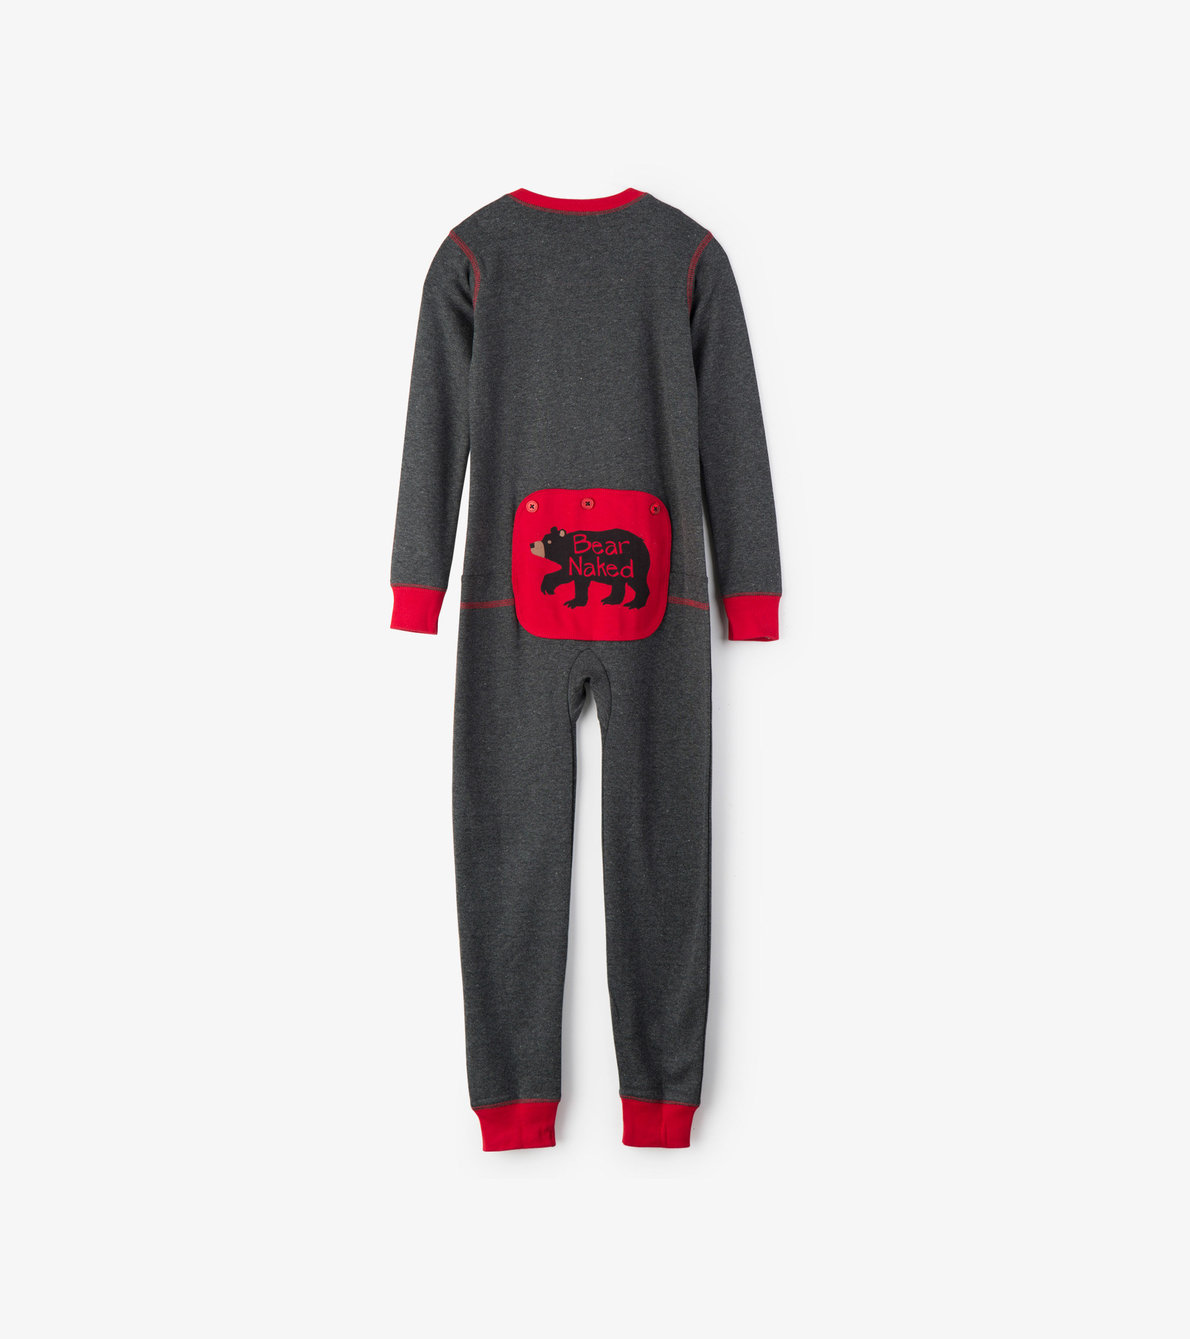 View larger image of Charcoal Bear Naked Kids Union Suit